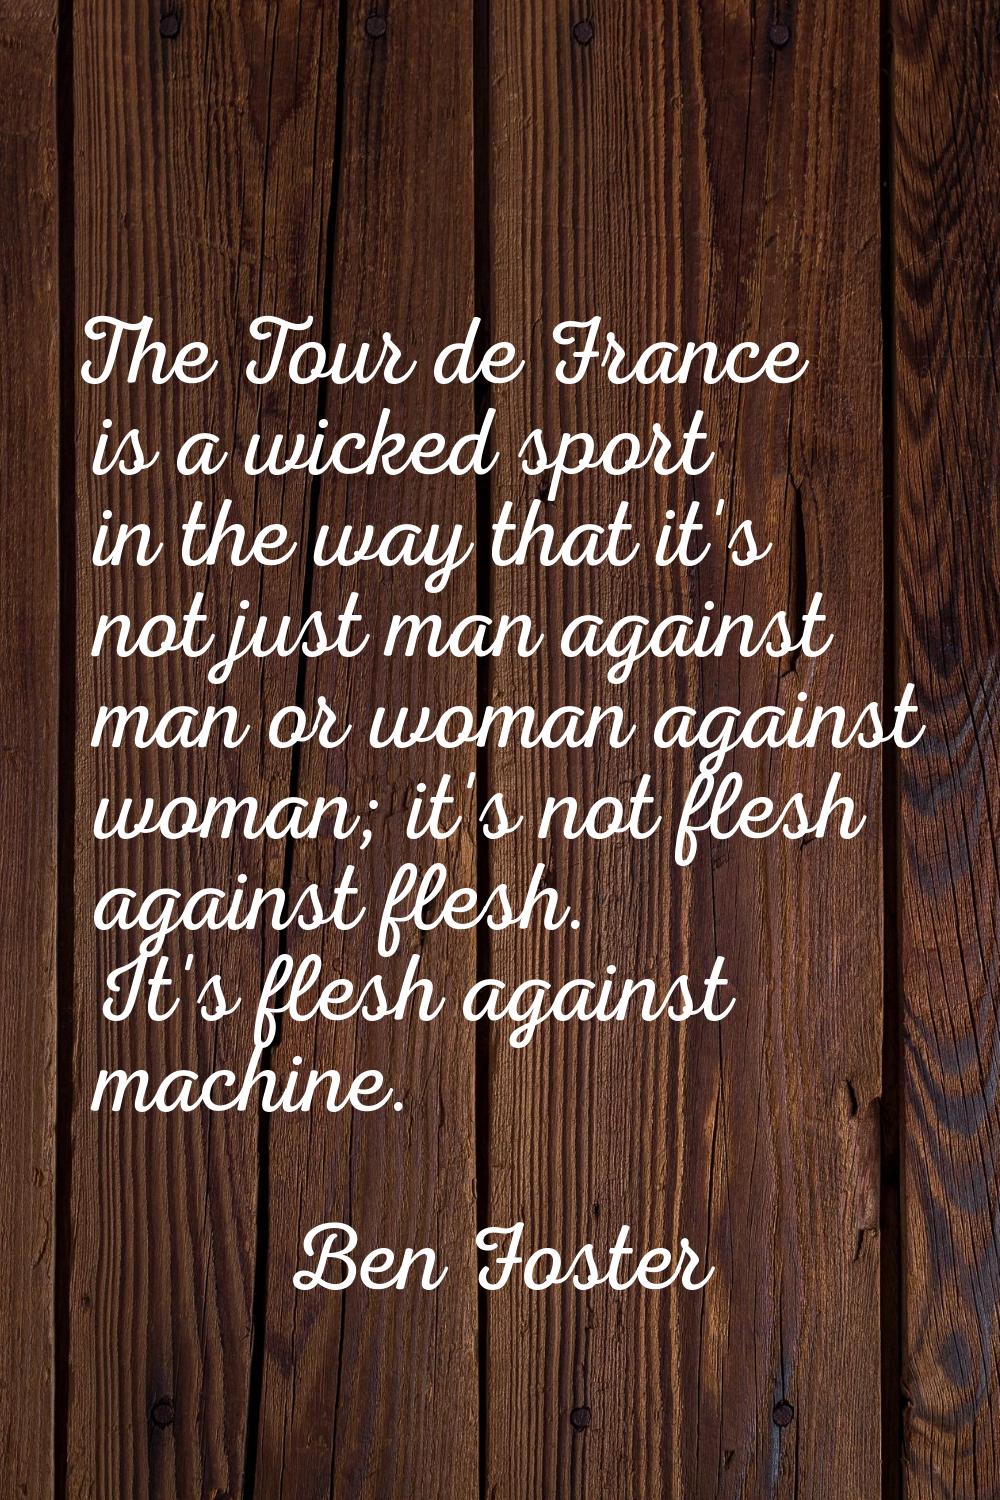 The Tour de France is a wicked sport in the way that it's not just man against man or woman against